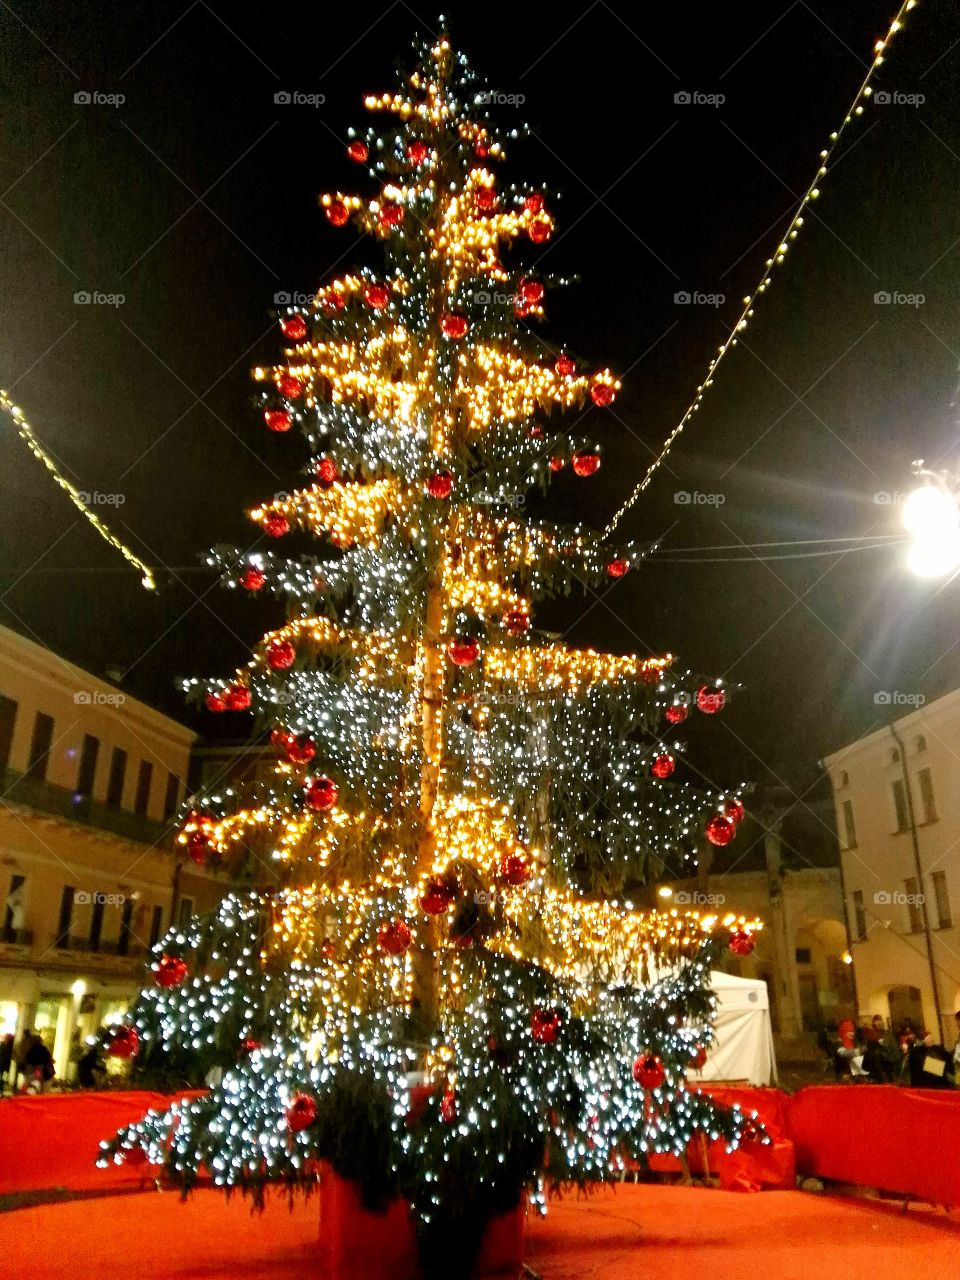 Christmas tree in the city center, Italy